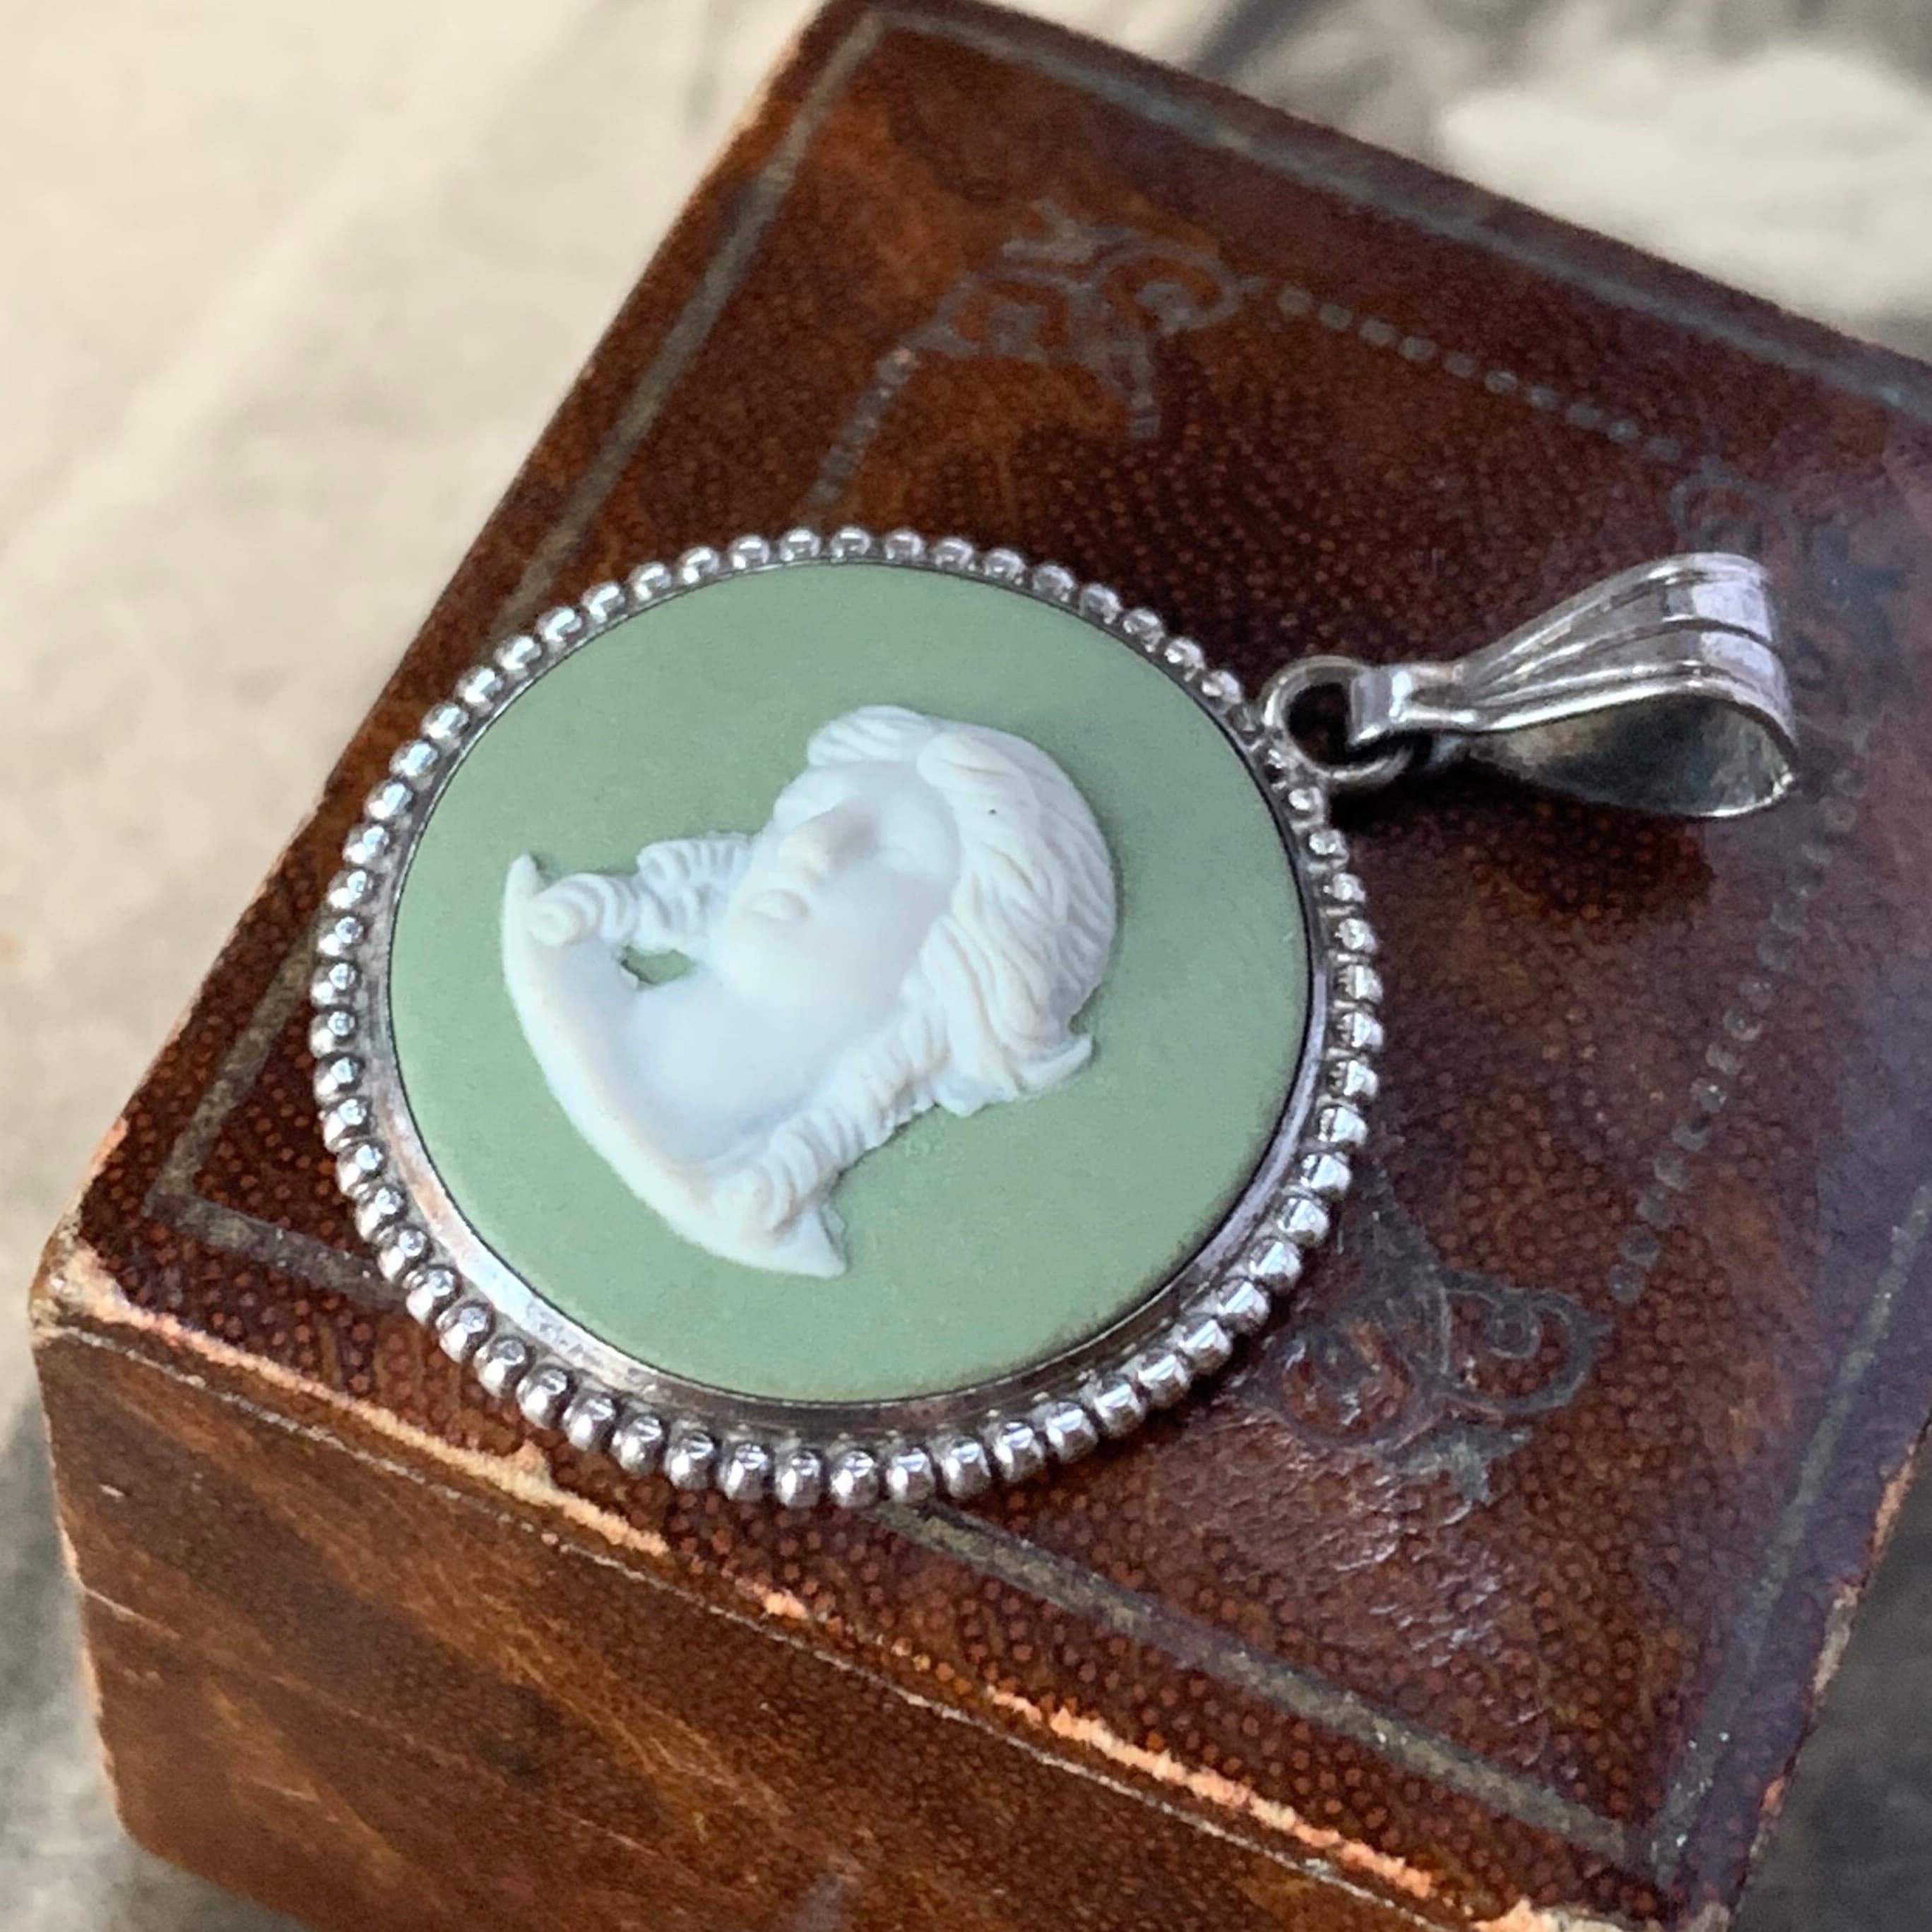 Vintage Sterling Silver Wedgwood Cameo Pendant Is A True Treasure Beautifully Crafted Jasperware With An Exquisite Portrait Of Goddess